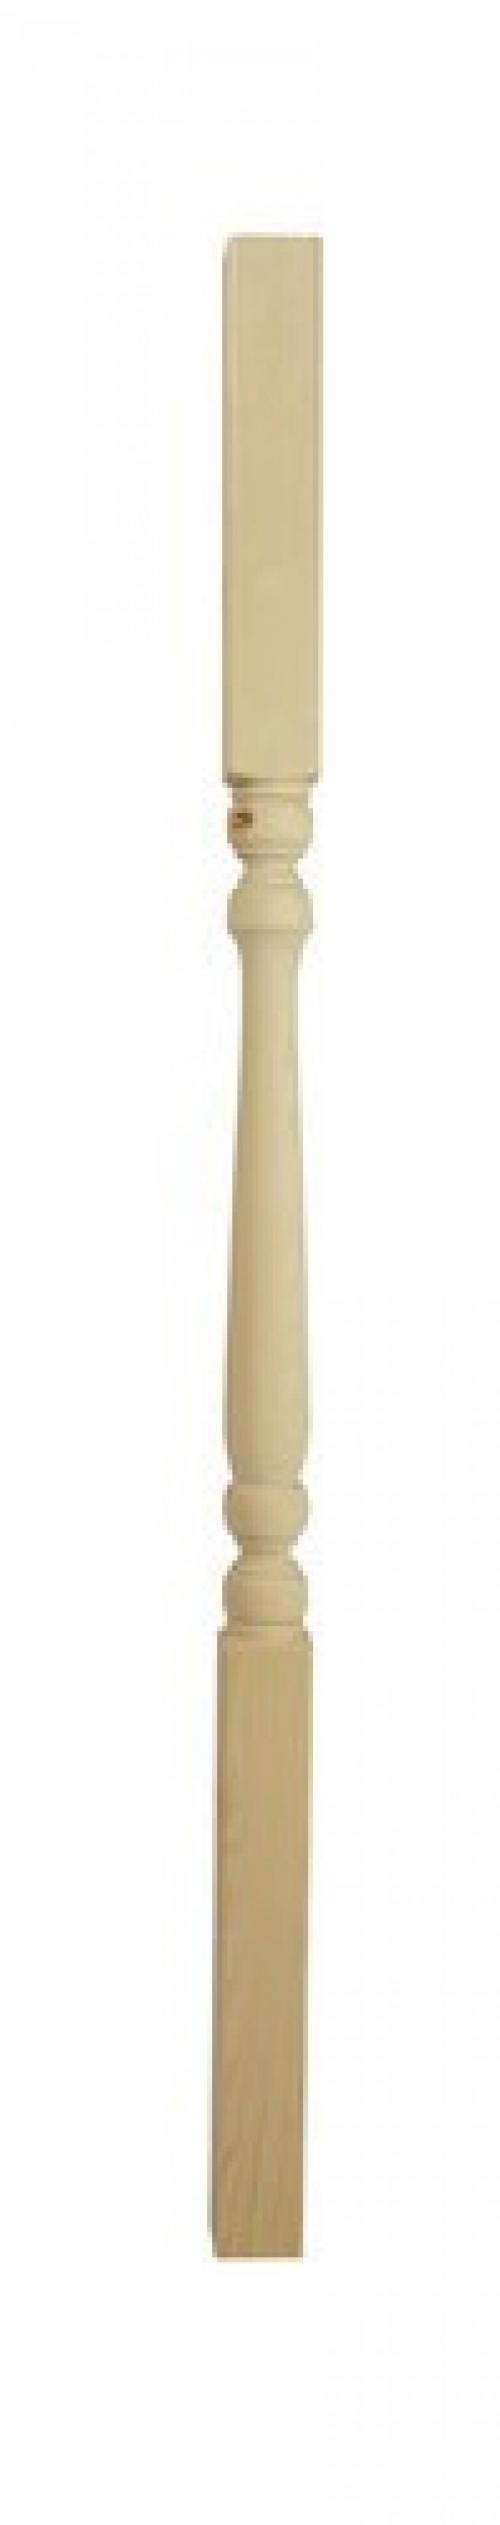 Image for Pine Colonial Spindle 900 41mm